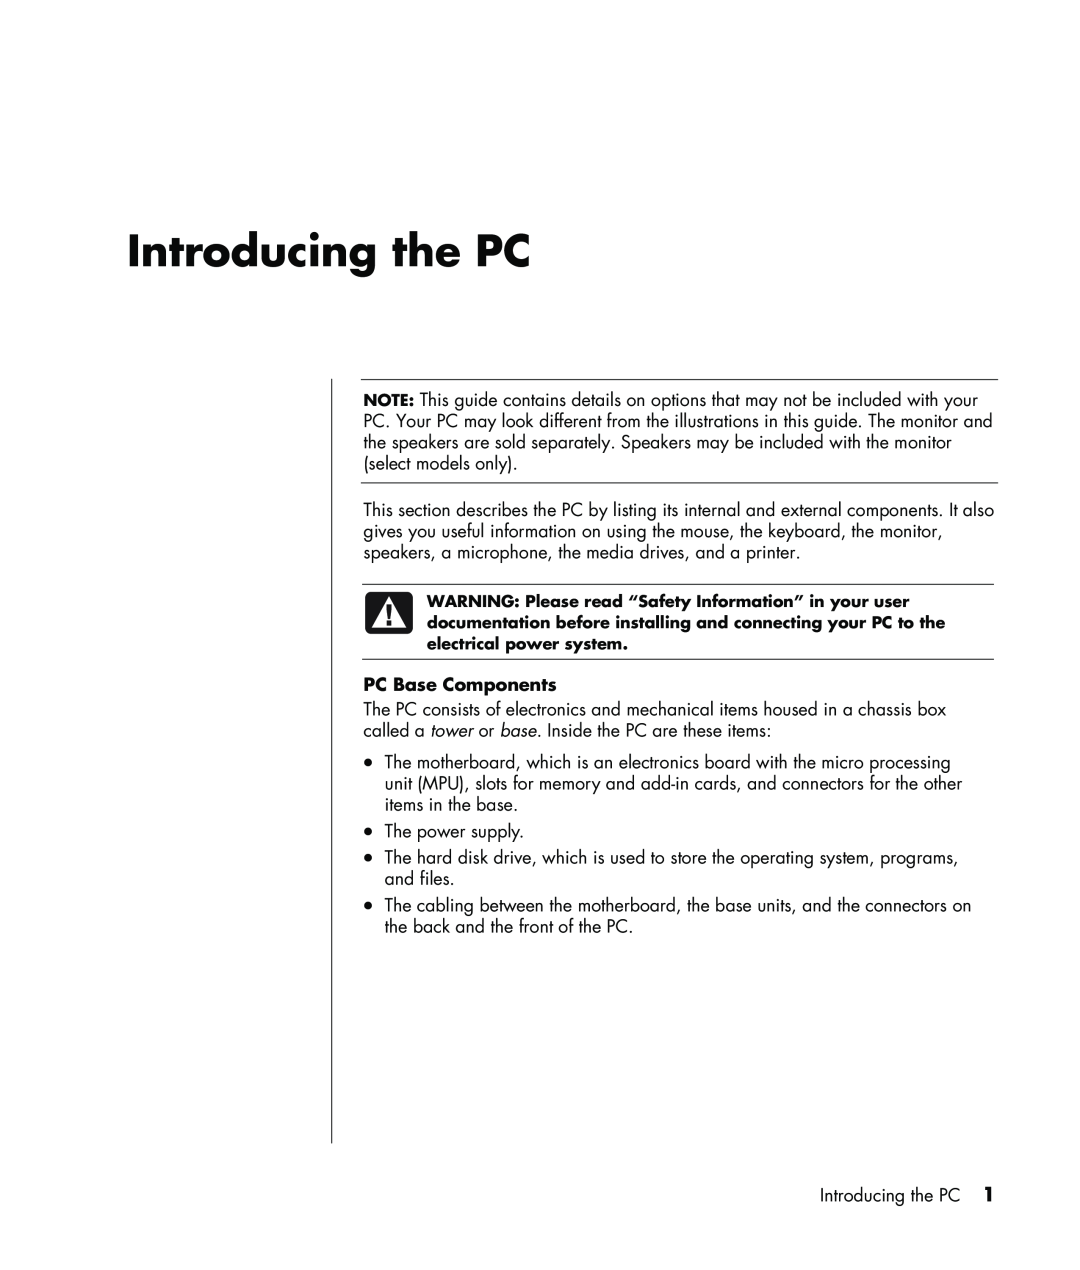 HP a1029.uk, a1005.uk, m7181.uk, SR1420UK, SR1460UK, SR1440UK manual Introducing the PC, PC Base Components 